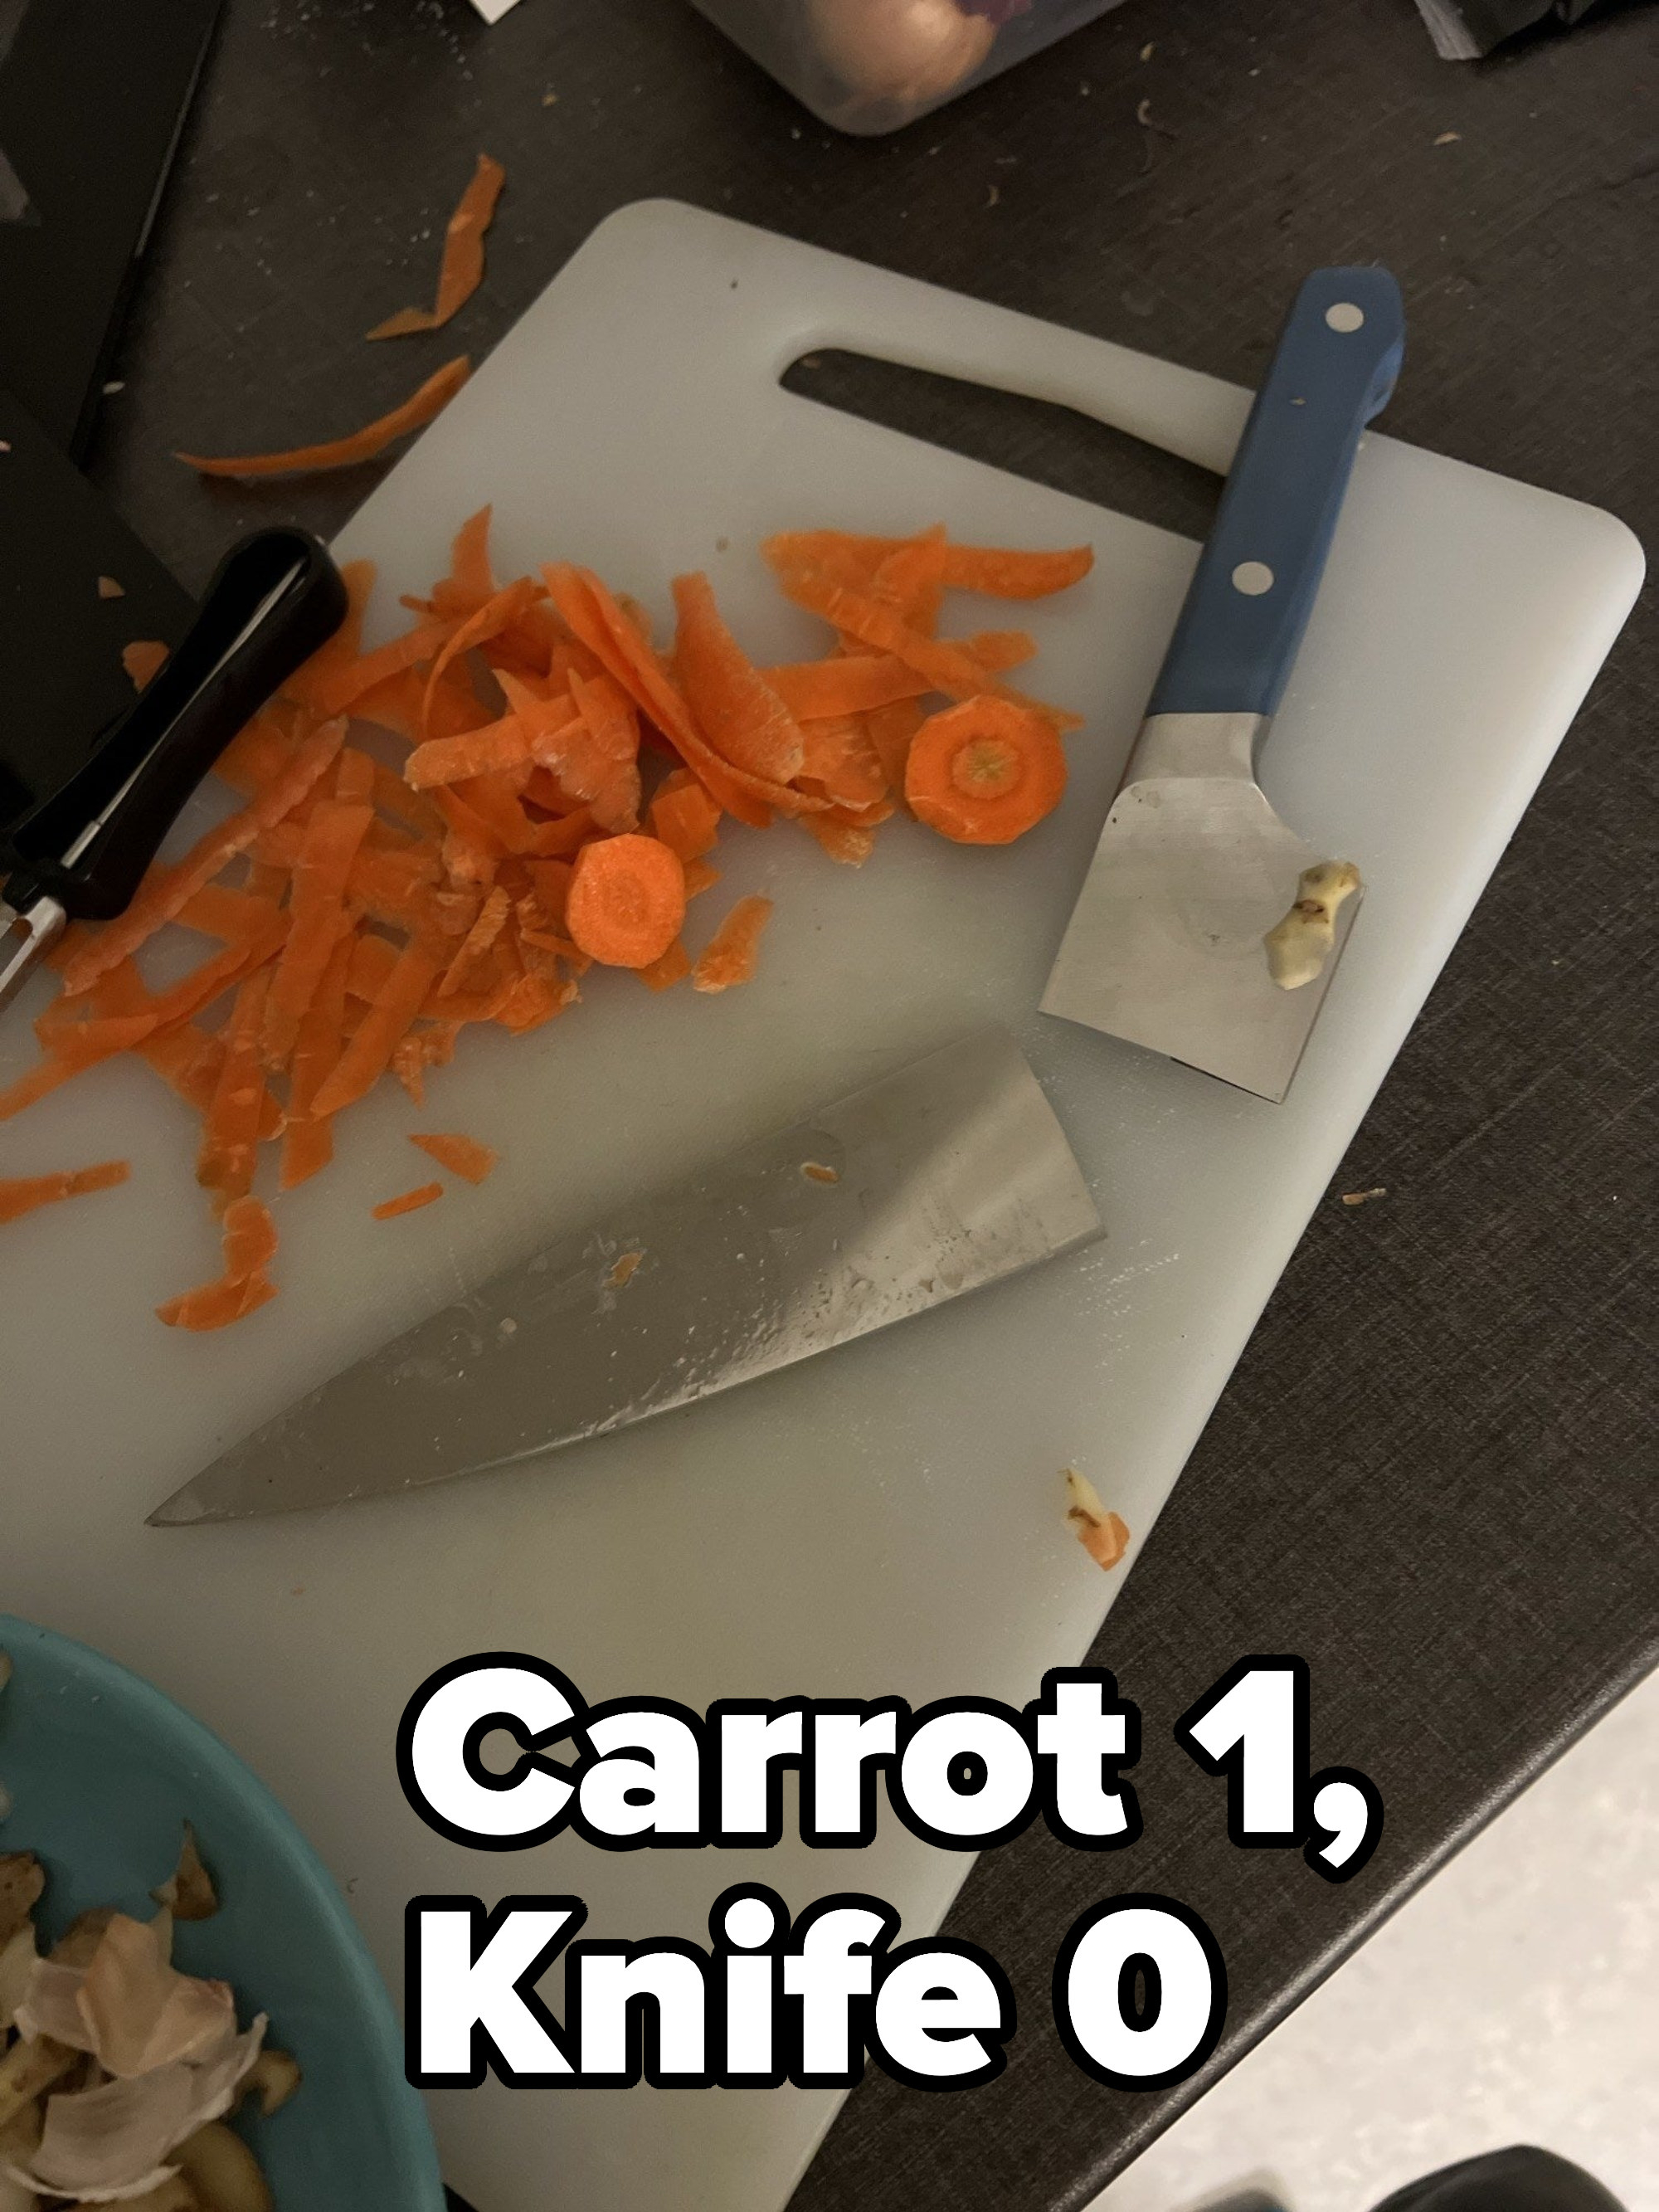 knife broken at the blade by cutting into a carrot